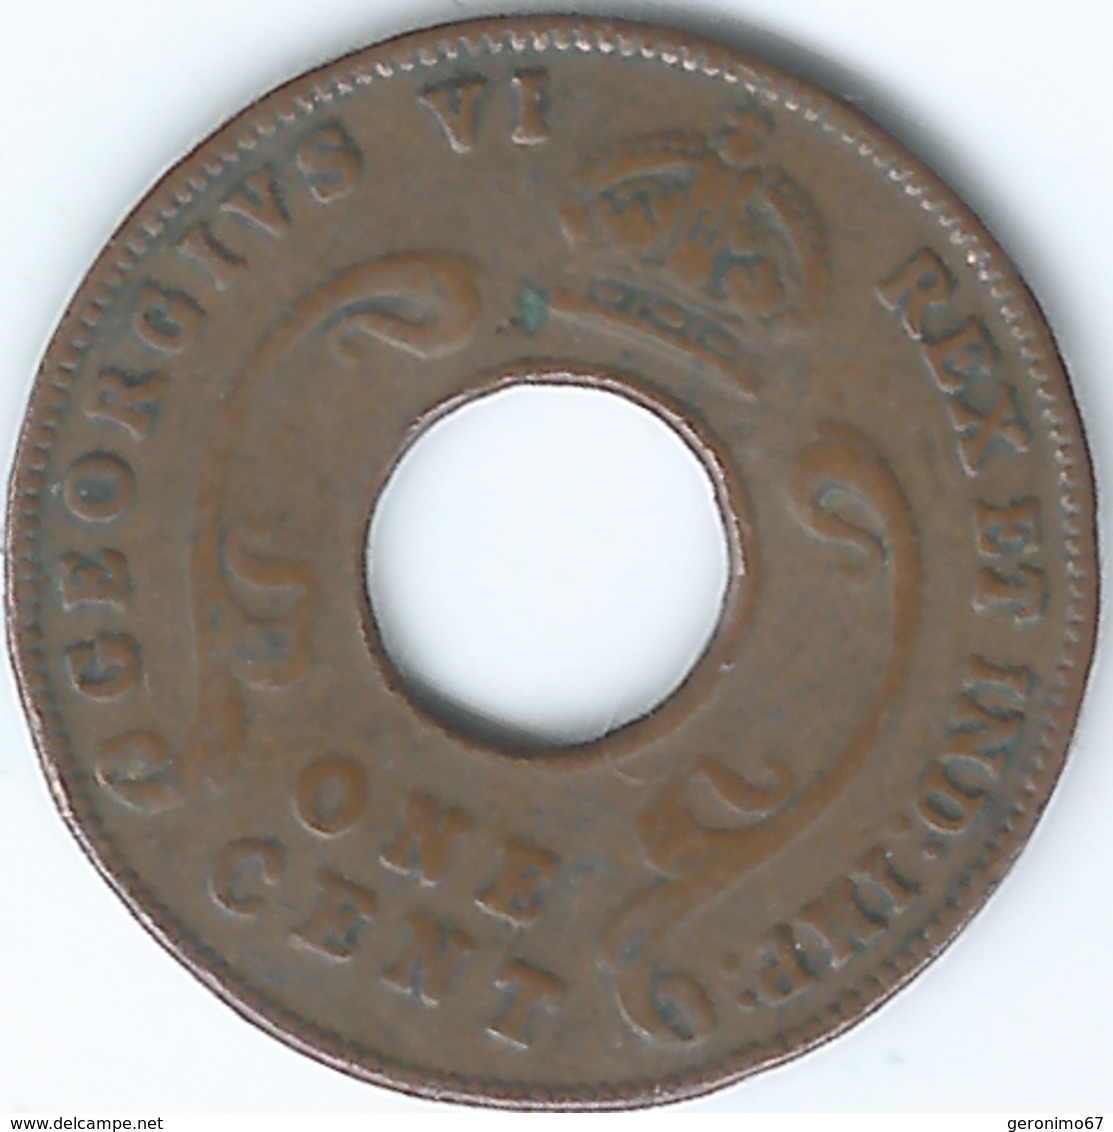 East Africa - George VI - 1 Cent - 1942 - KM29 - Colonia Británica